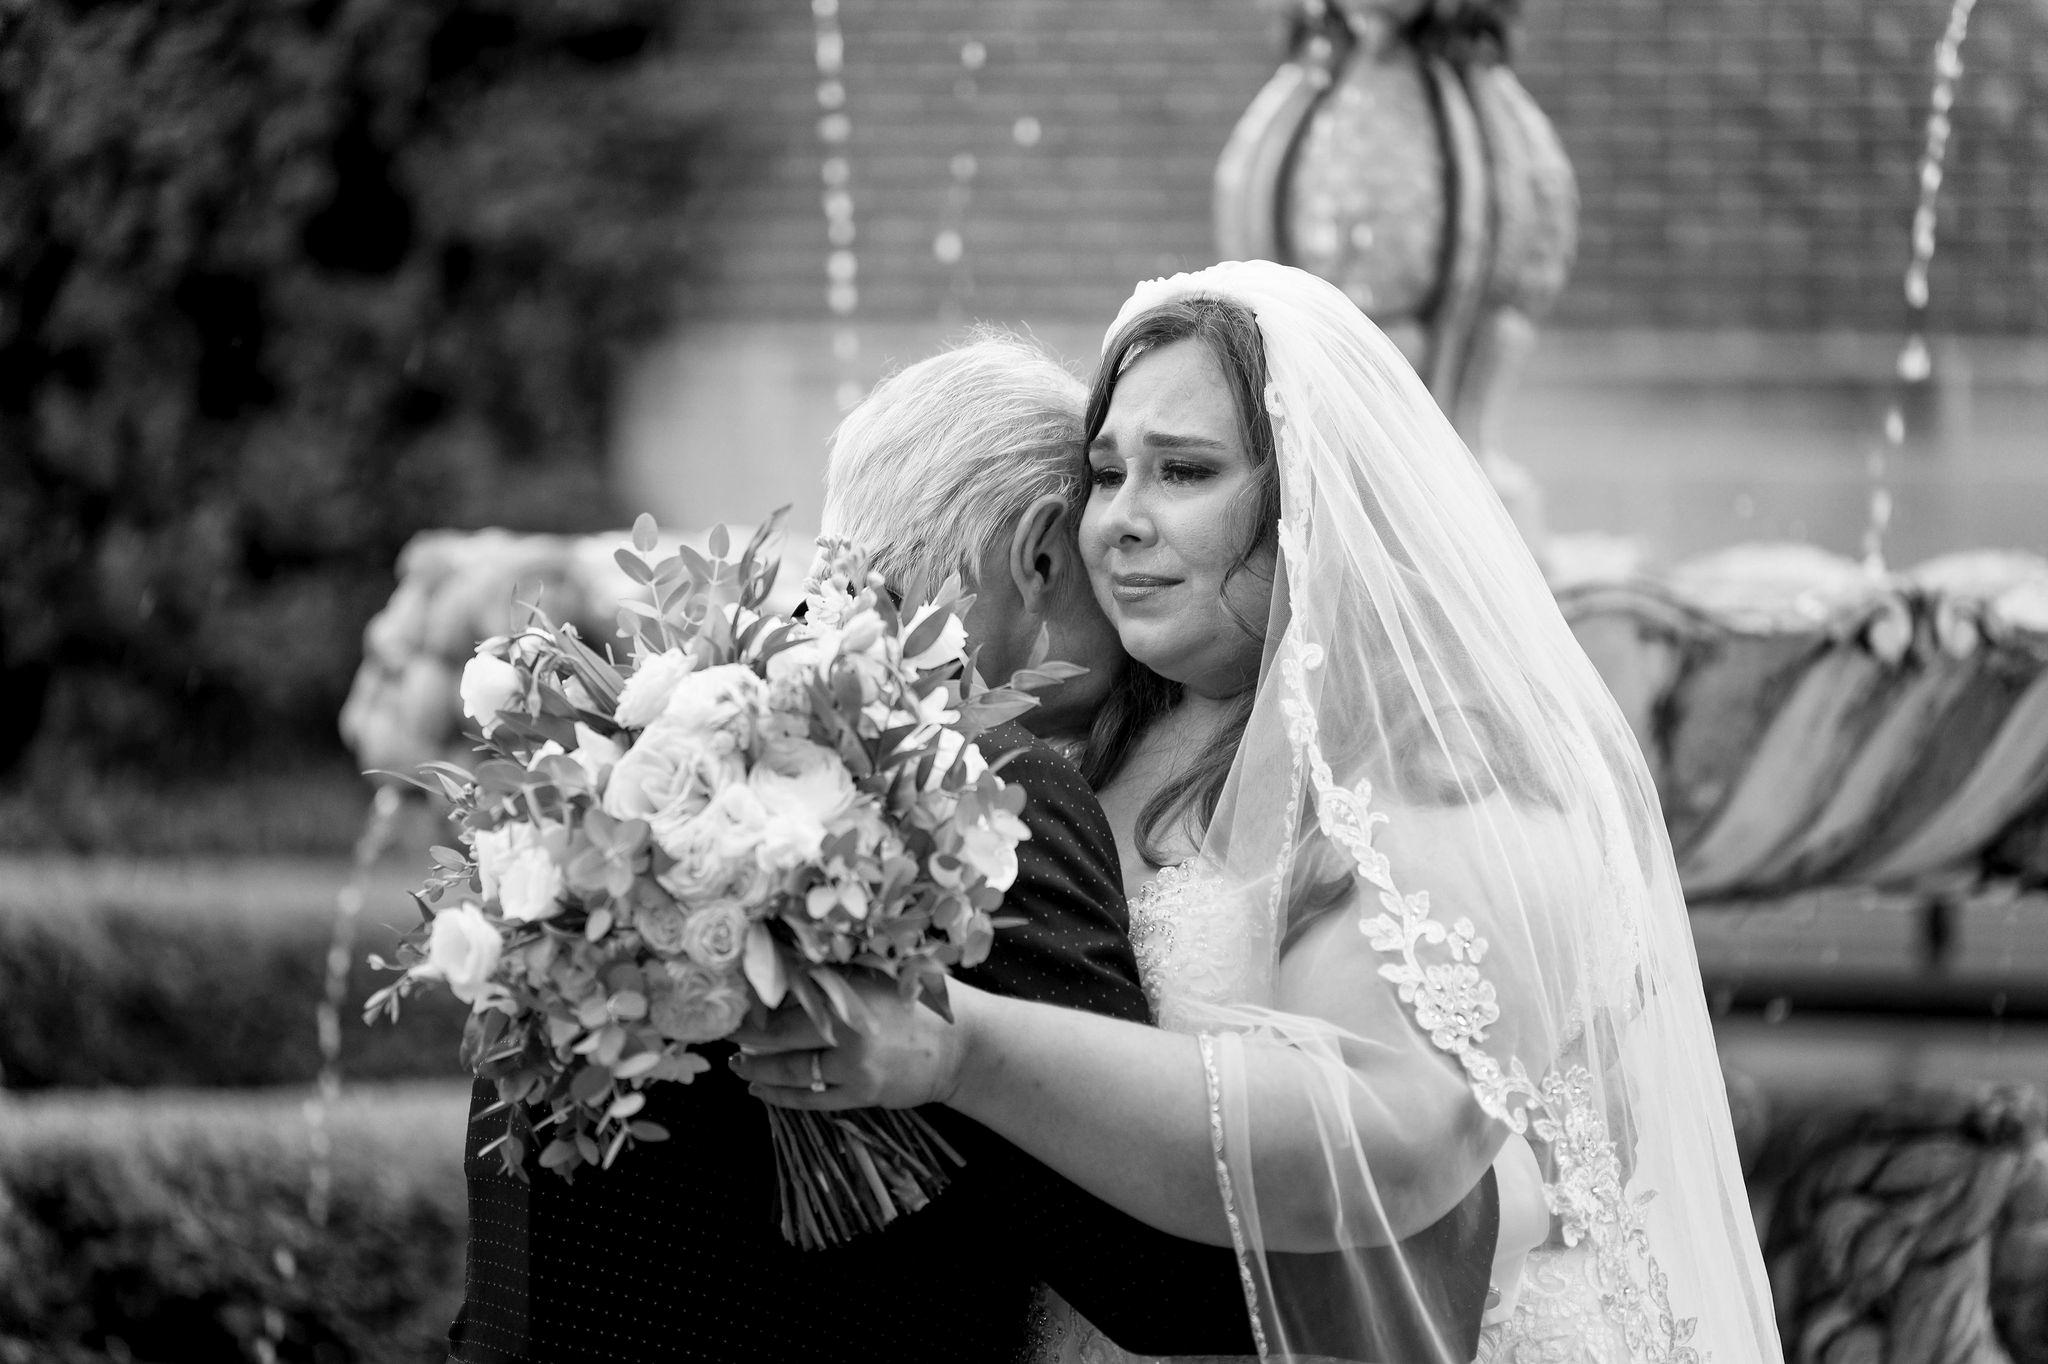 A dad embraces his daughter, the bride, on her wedding day. 